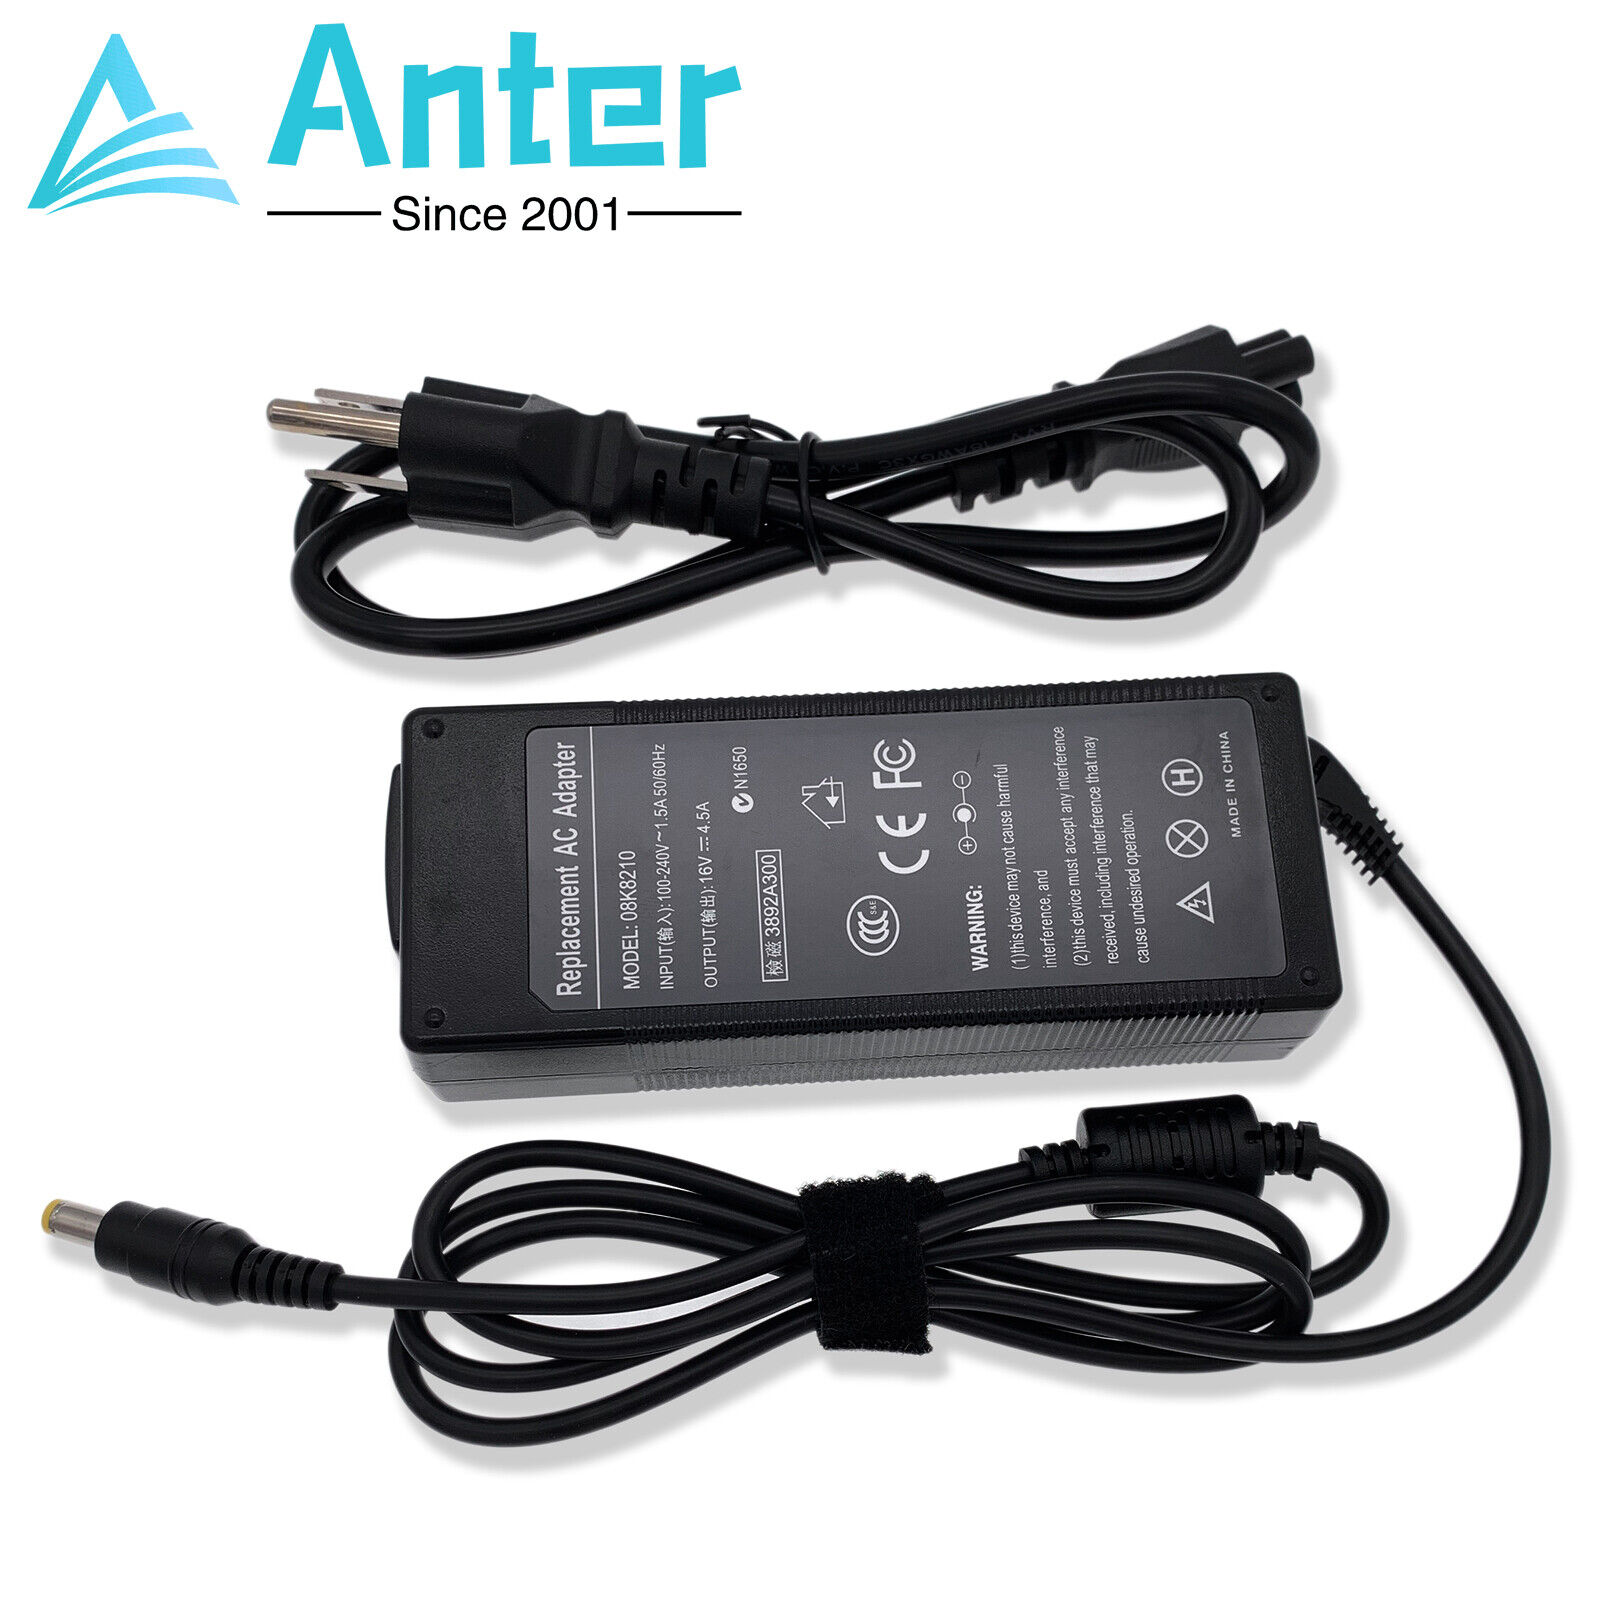 AC Adapter Charger Power For Laptop IBM ThinkPad T40 T41 T42 T43 72W 16V 4.5A 